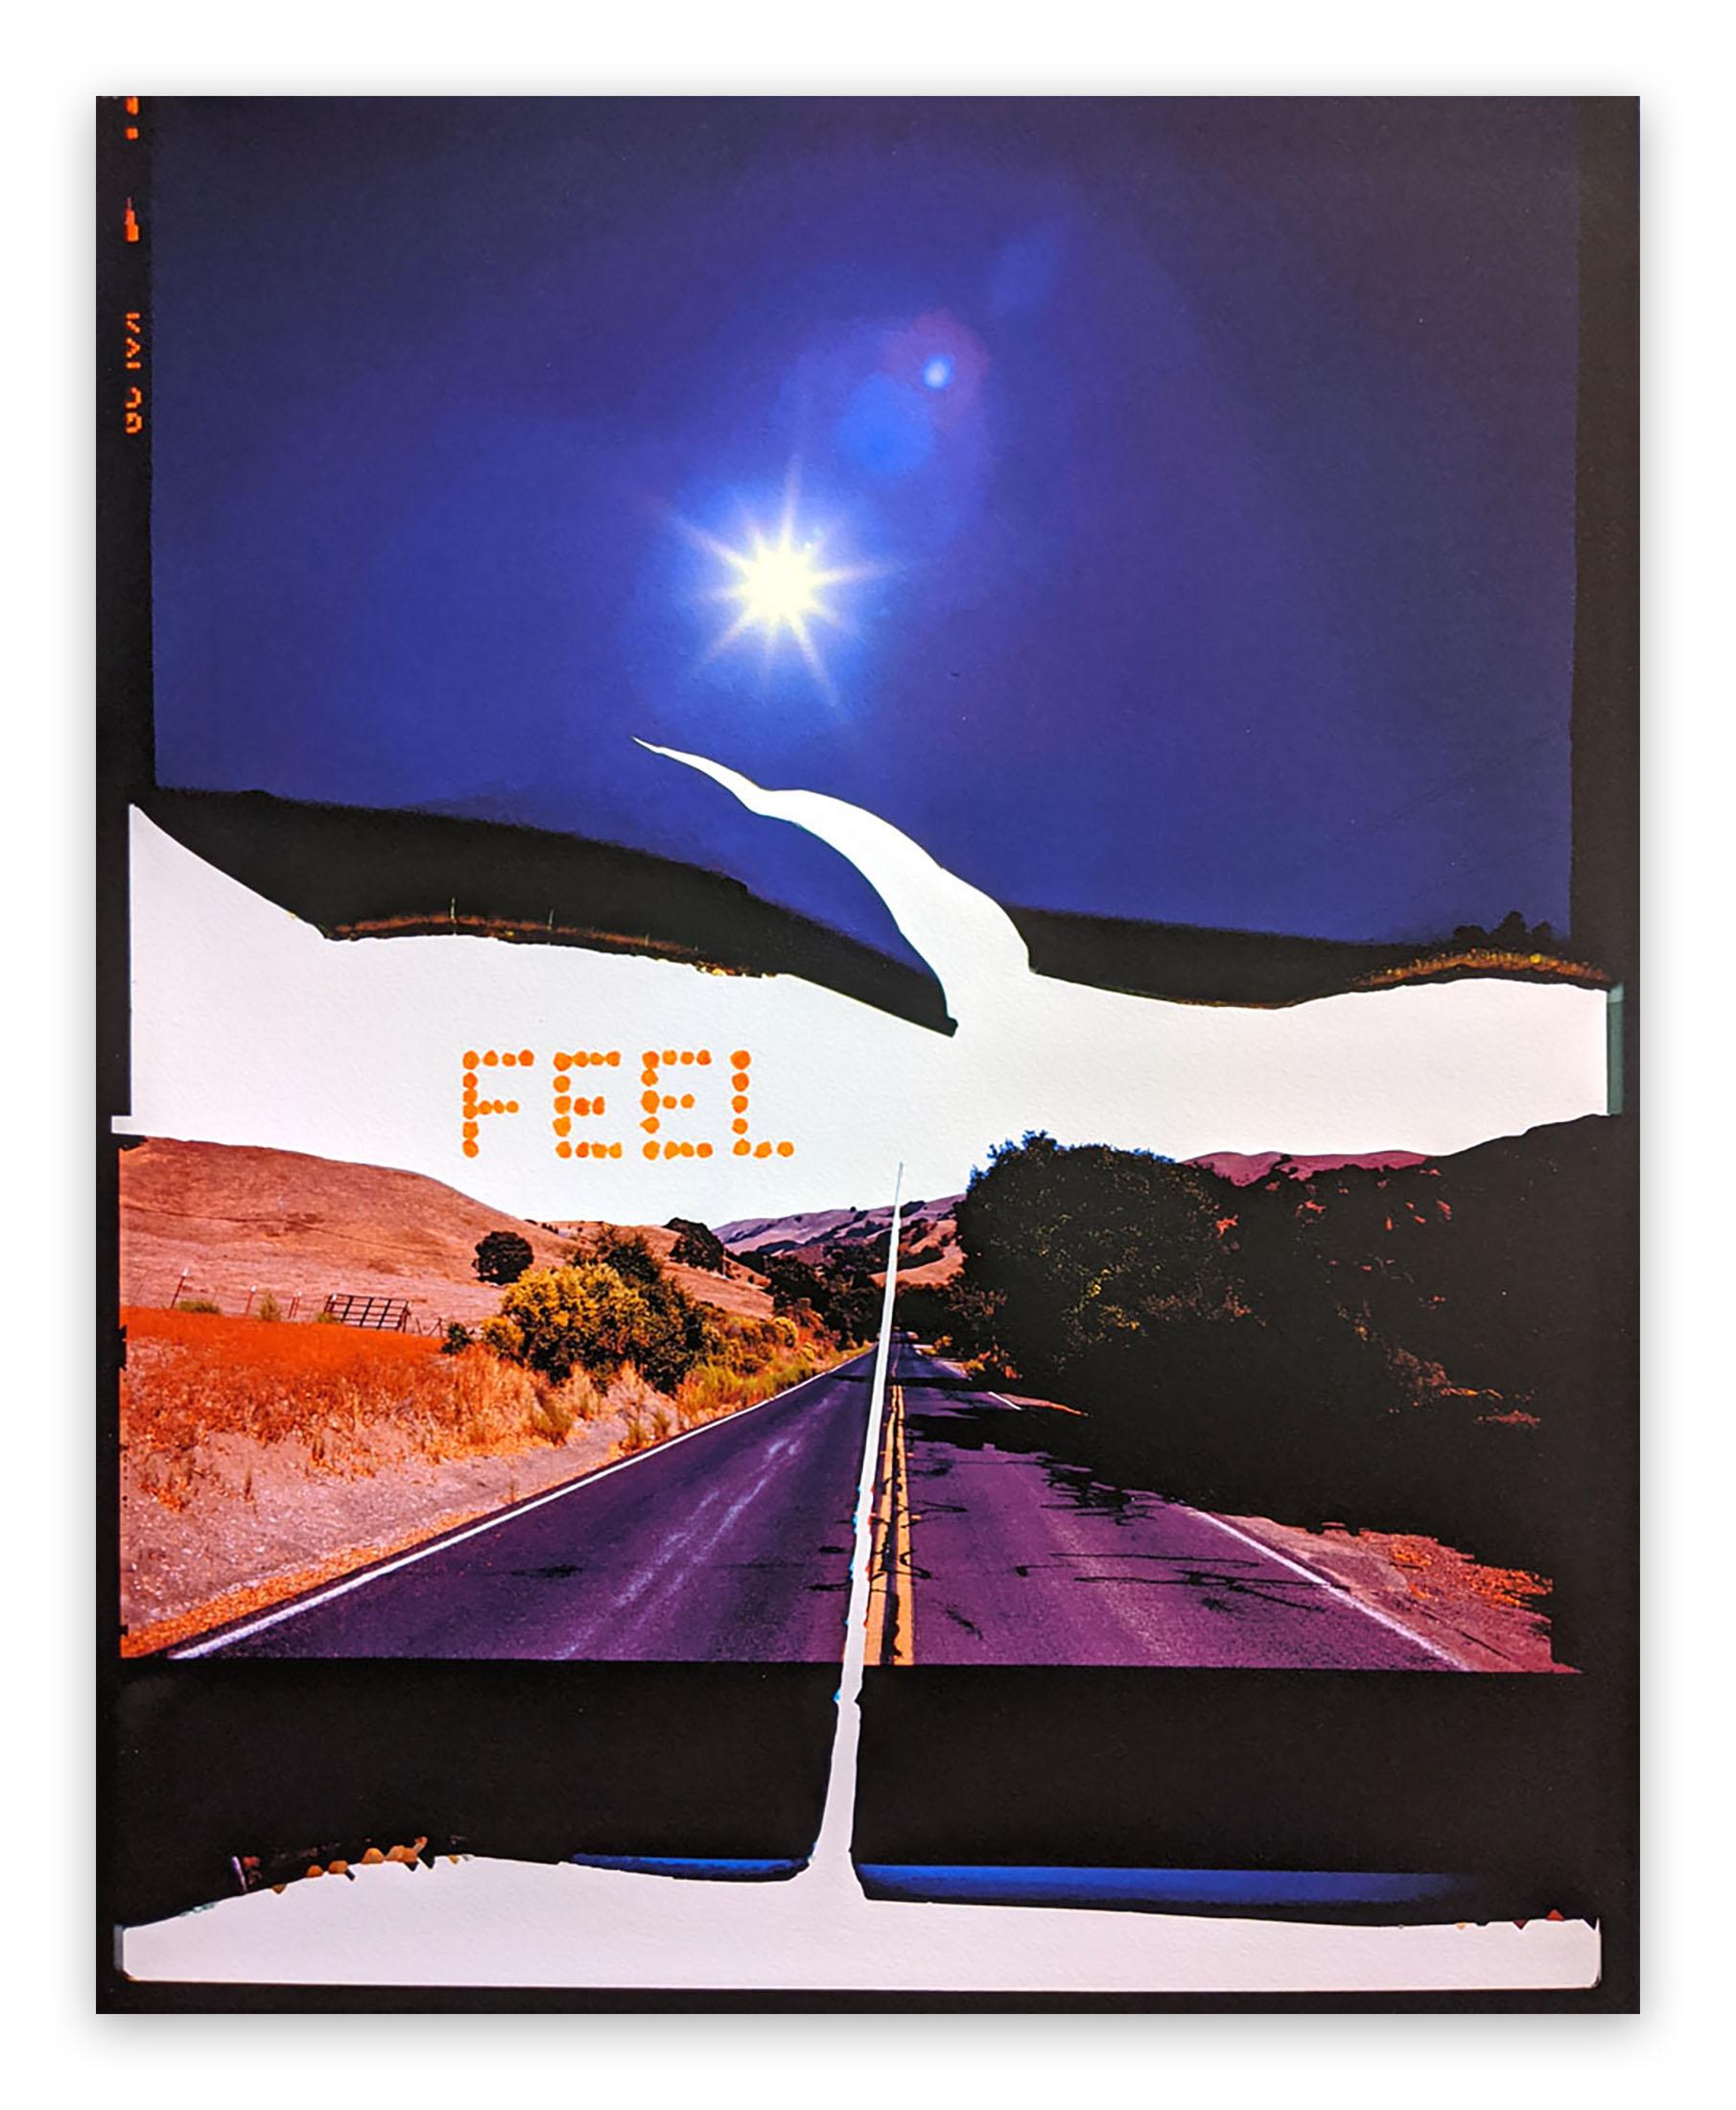 Jason Engelund Abstract Photograph - Feel, Canyon Road (Abstract photography)